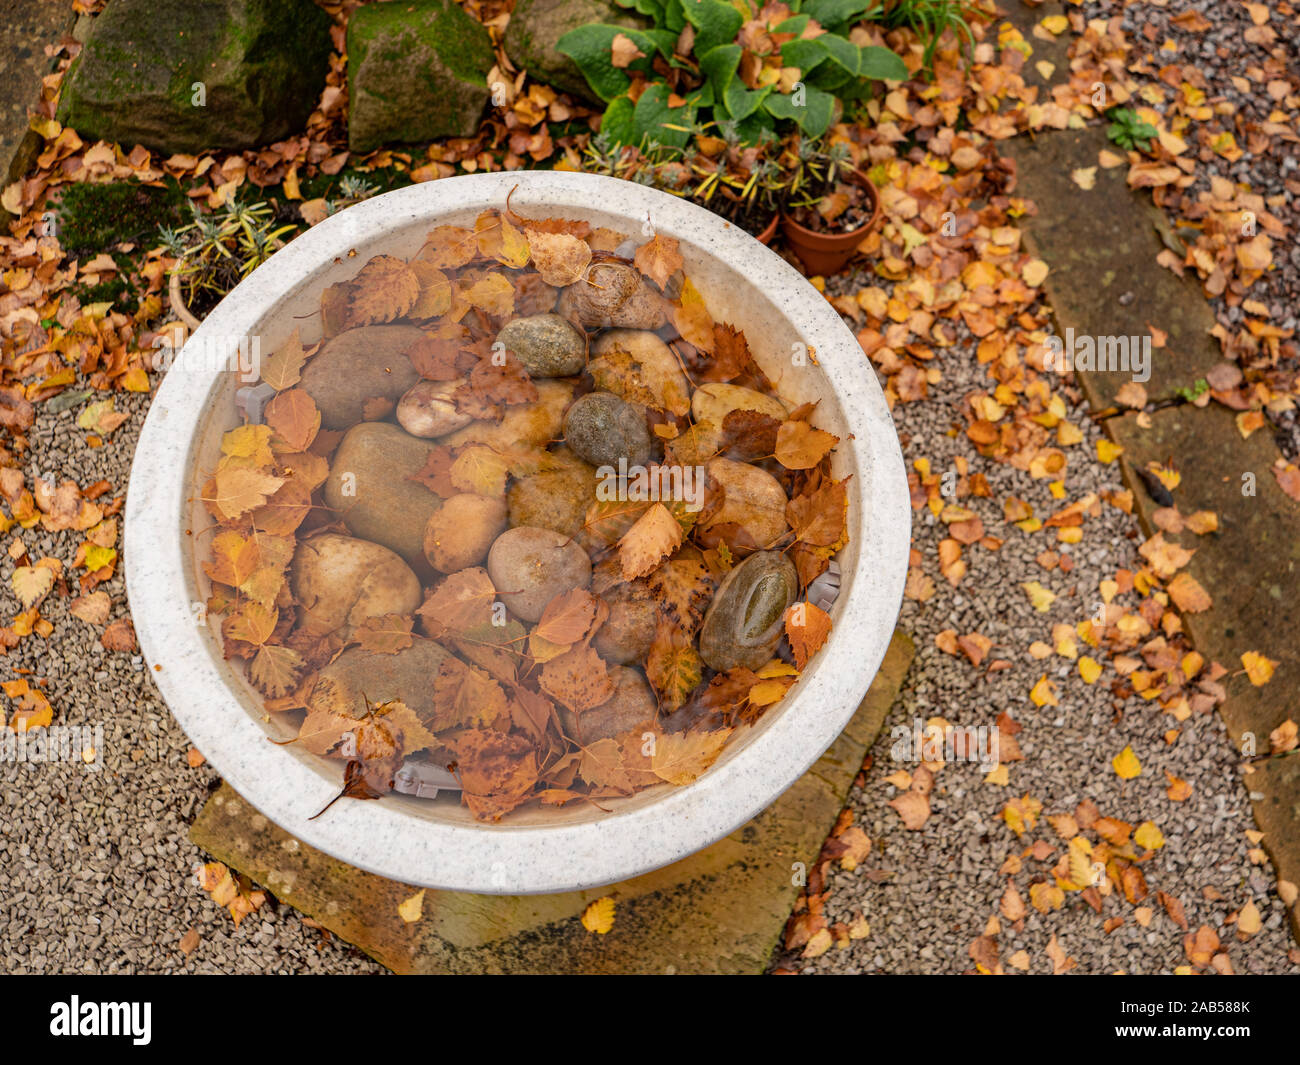 Leaves and pebbles in clear water in bird bath in garden. Stock Photo